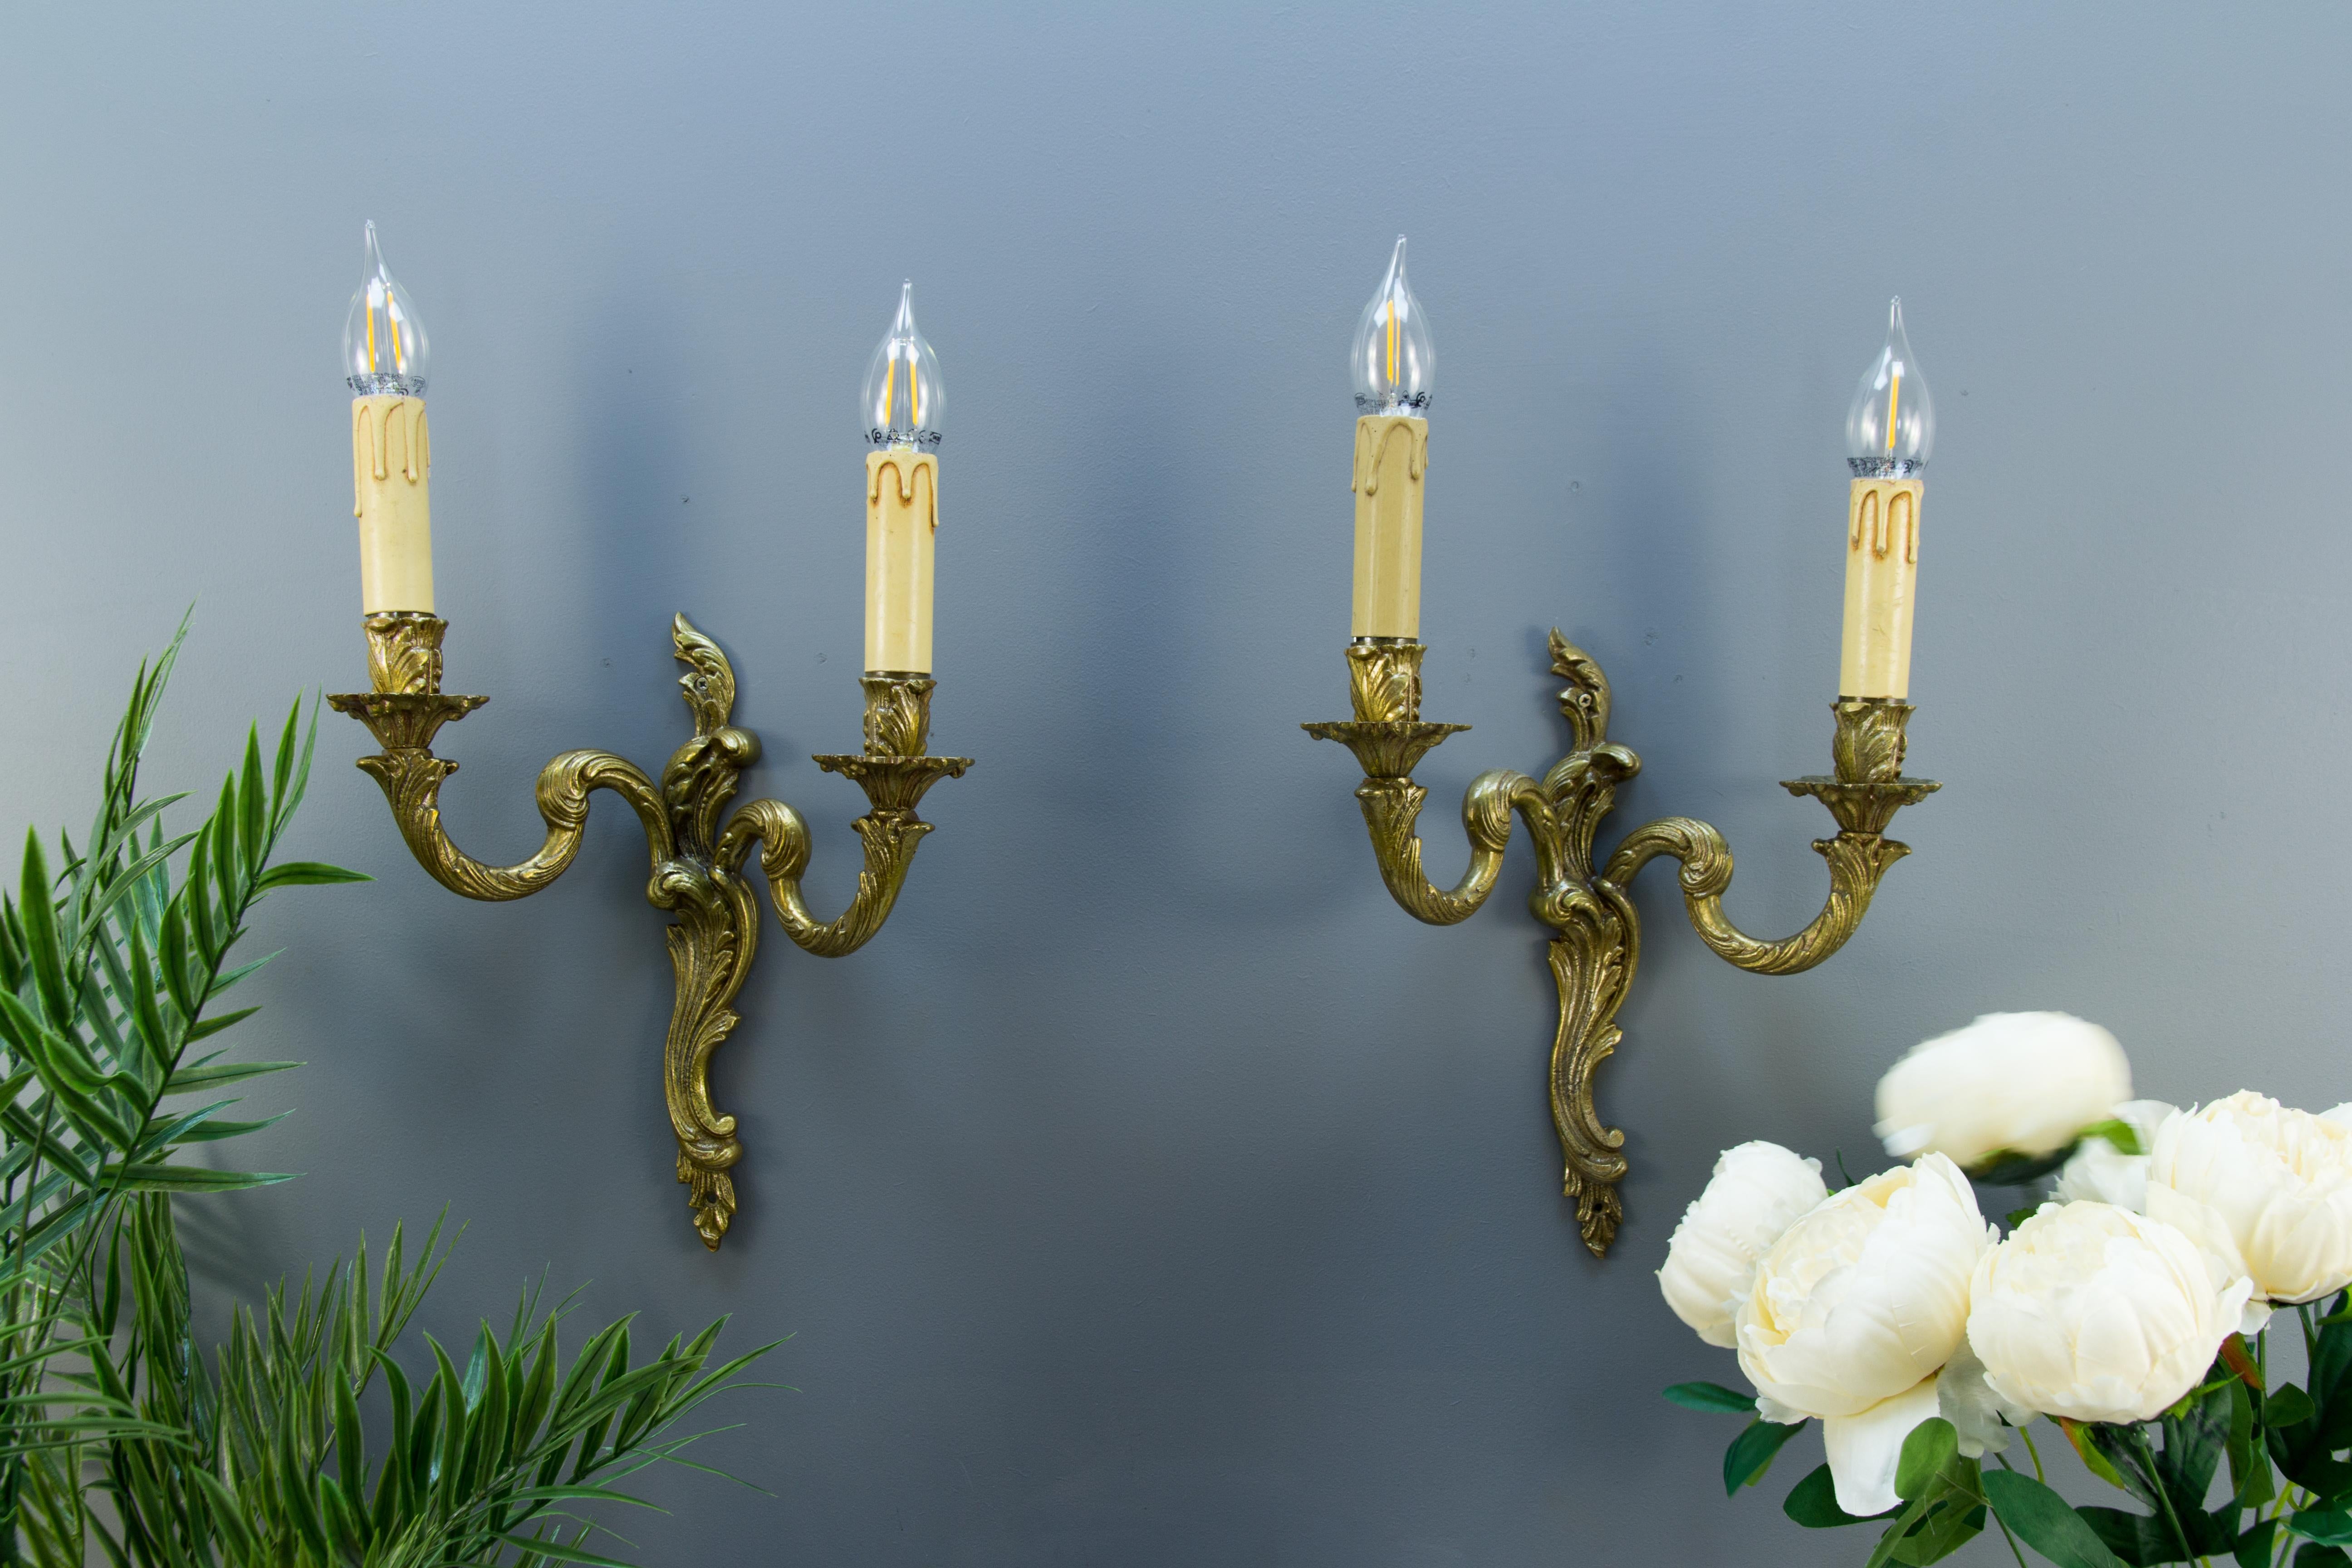 A pair of Rococo or Louis XV-style ornate wall sconces with curvy asymmetrical acanthus leaf-like bronze scrolls. Each sconce has two arms, each with one socket for an E14-size light bulb. France, the first half of the 20th century.
Dimensions: